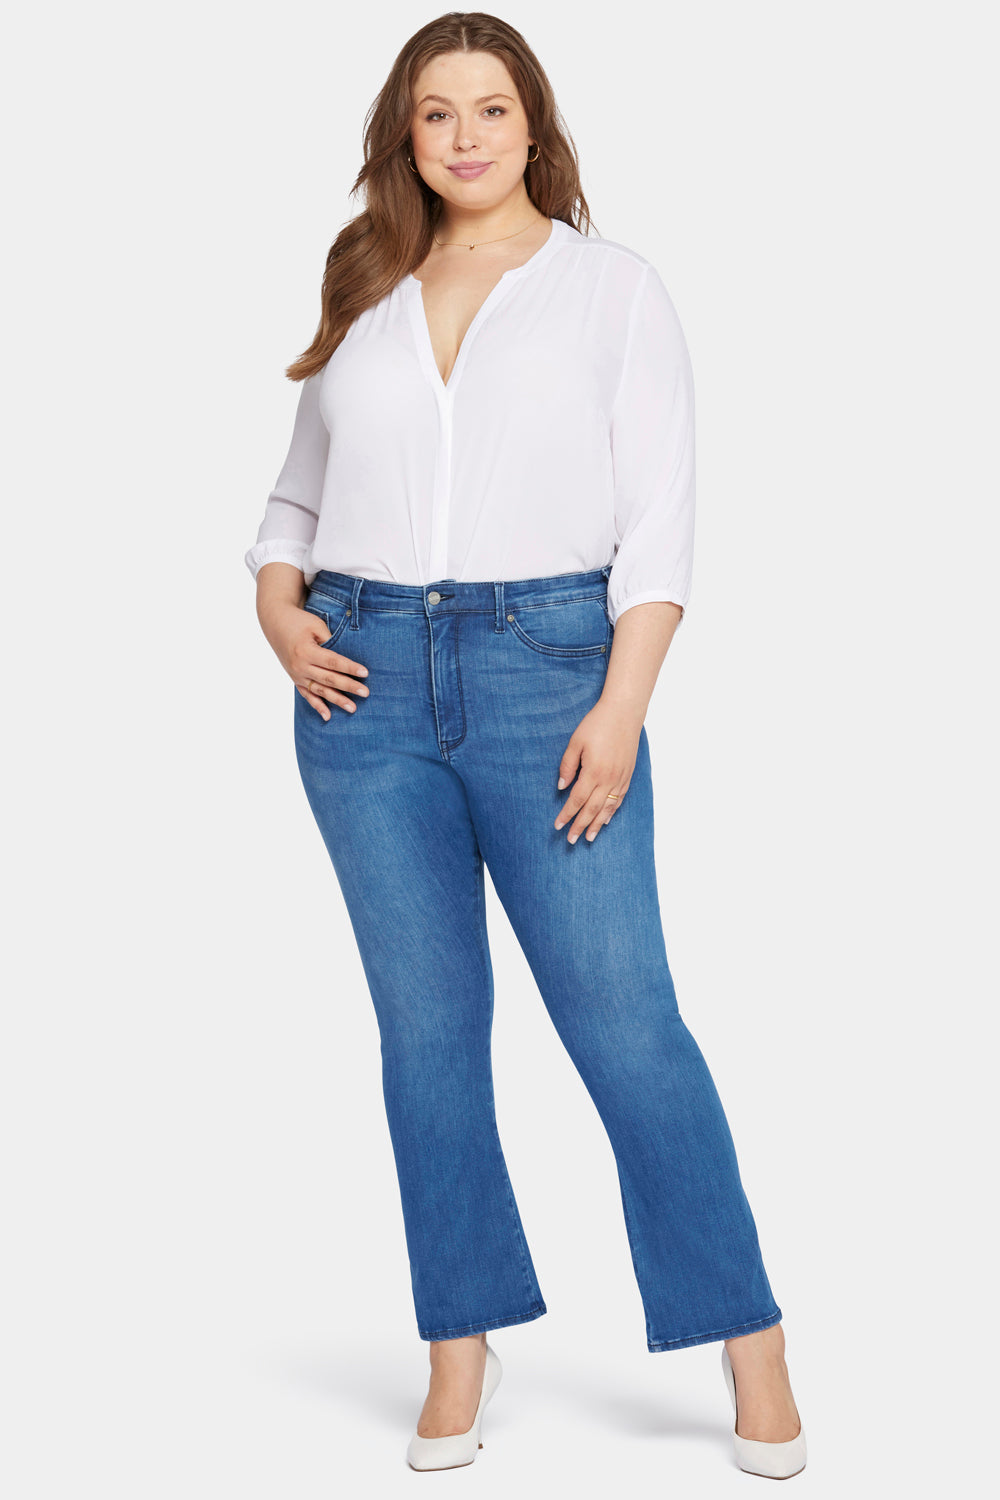 Le Silhouette Slim Bootcut Jeans In Petite Plus Size With High Rise - Amour  Blue